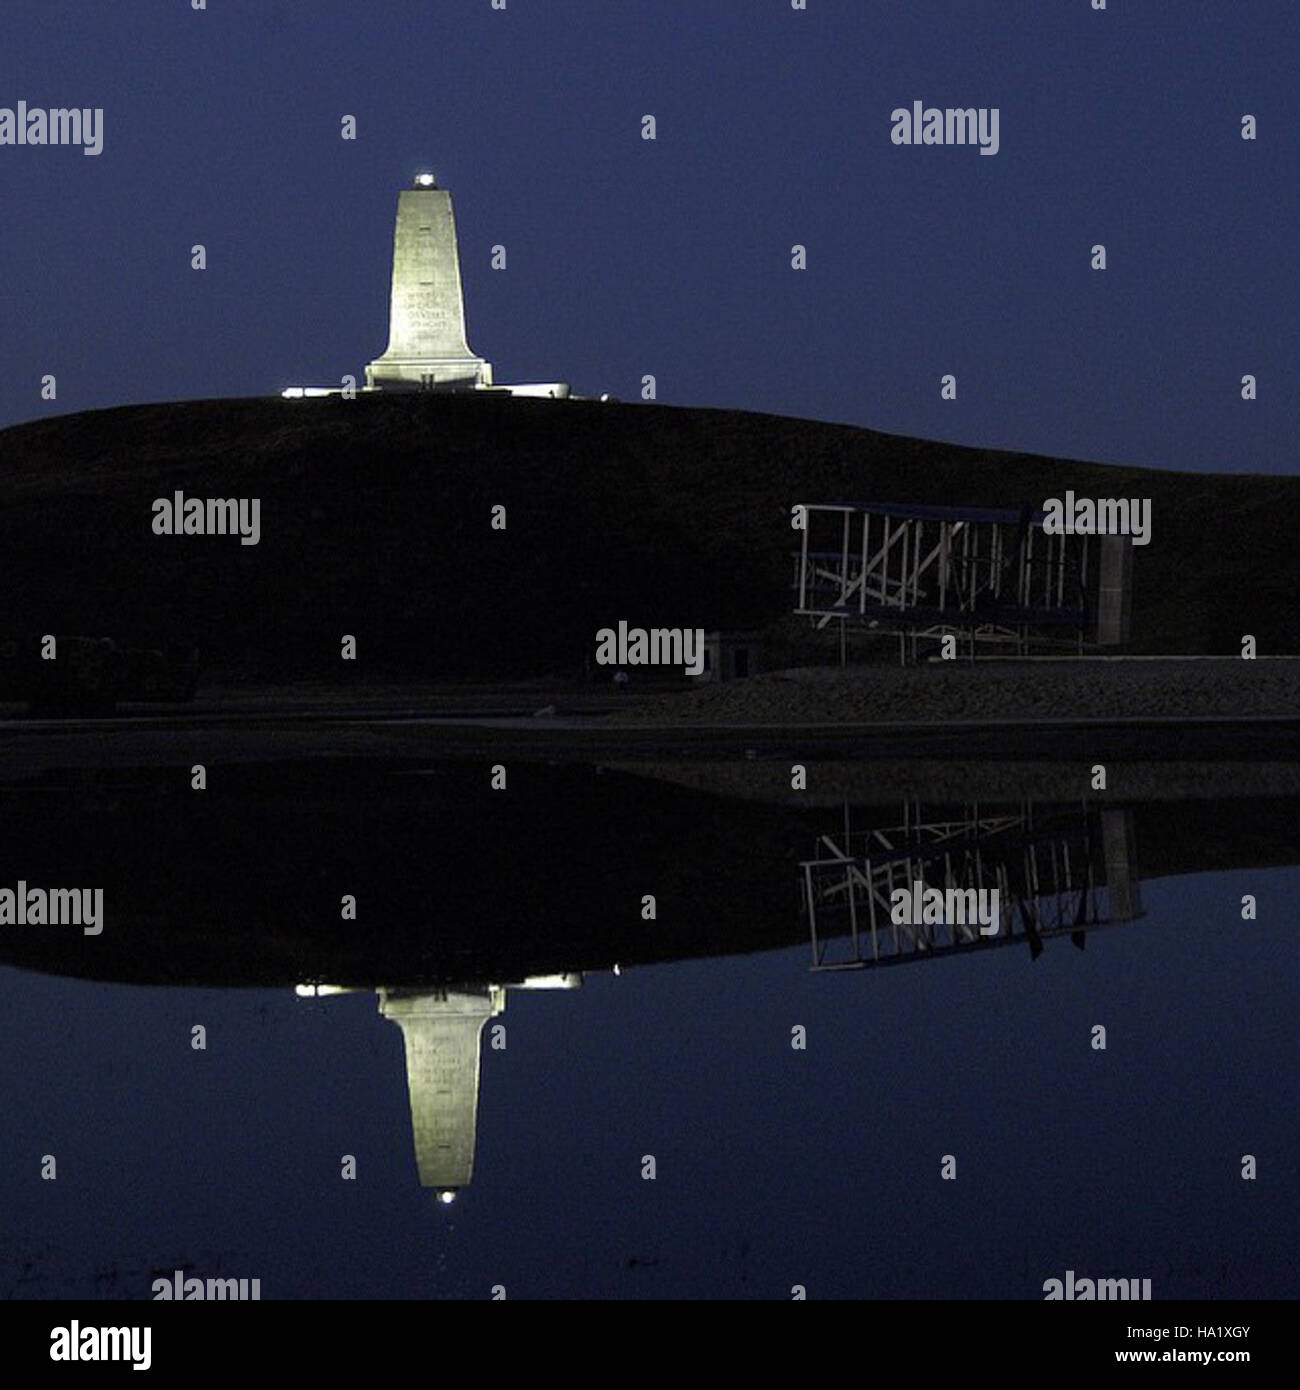 wrightbrosnps 17394162001 From 2002, the Wright Brothers Monument lit up at night and reflected off some water that pooled around the artistic sculpture of the first flight.  # Stock Photo